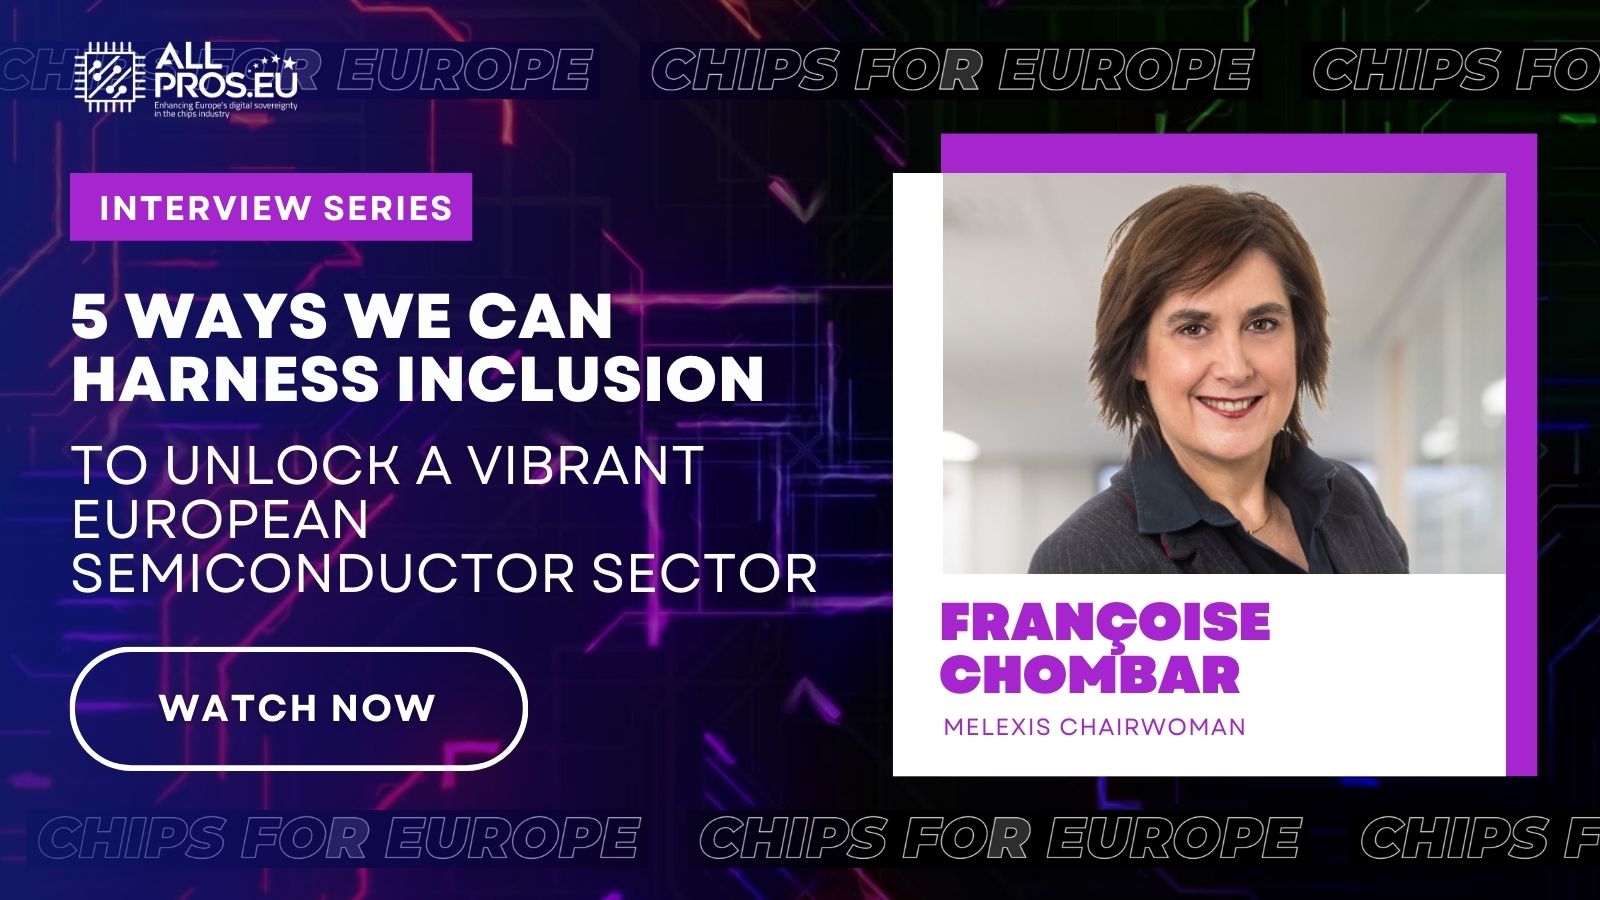 ALLPROS.eu Interview with Françoise Chombar, MELEXIS Chairwoman